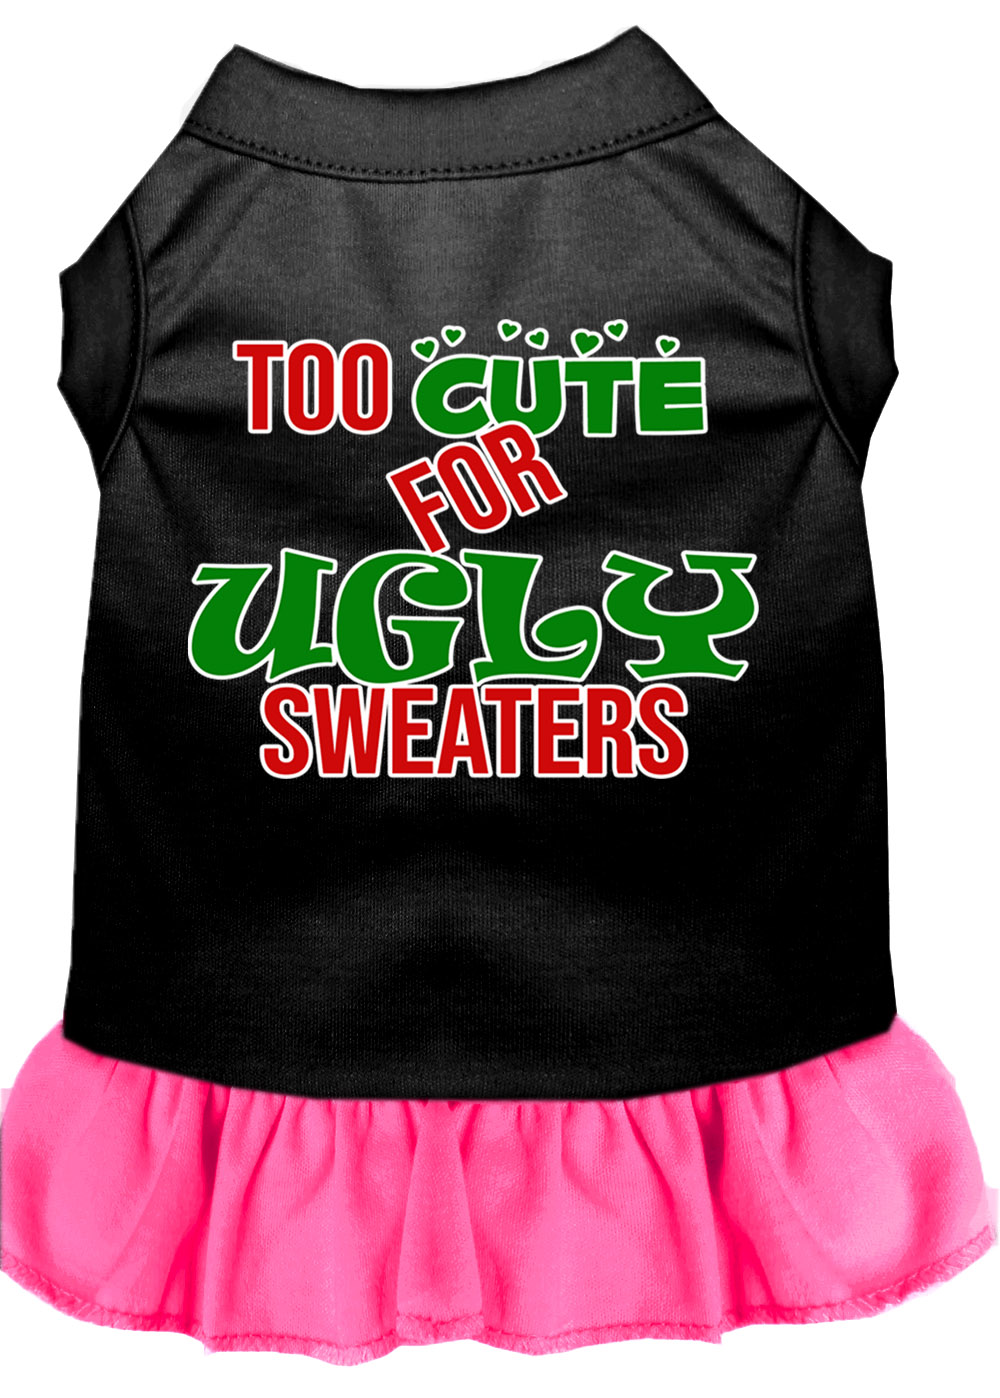 Too Cute for Ugly Sweaters Screen Print Dog Dress Black with Bright Pink XL